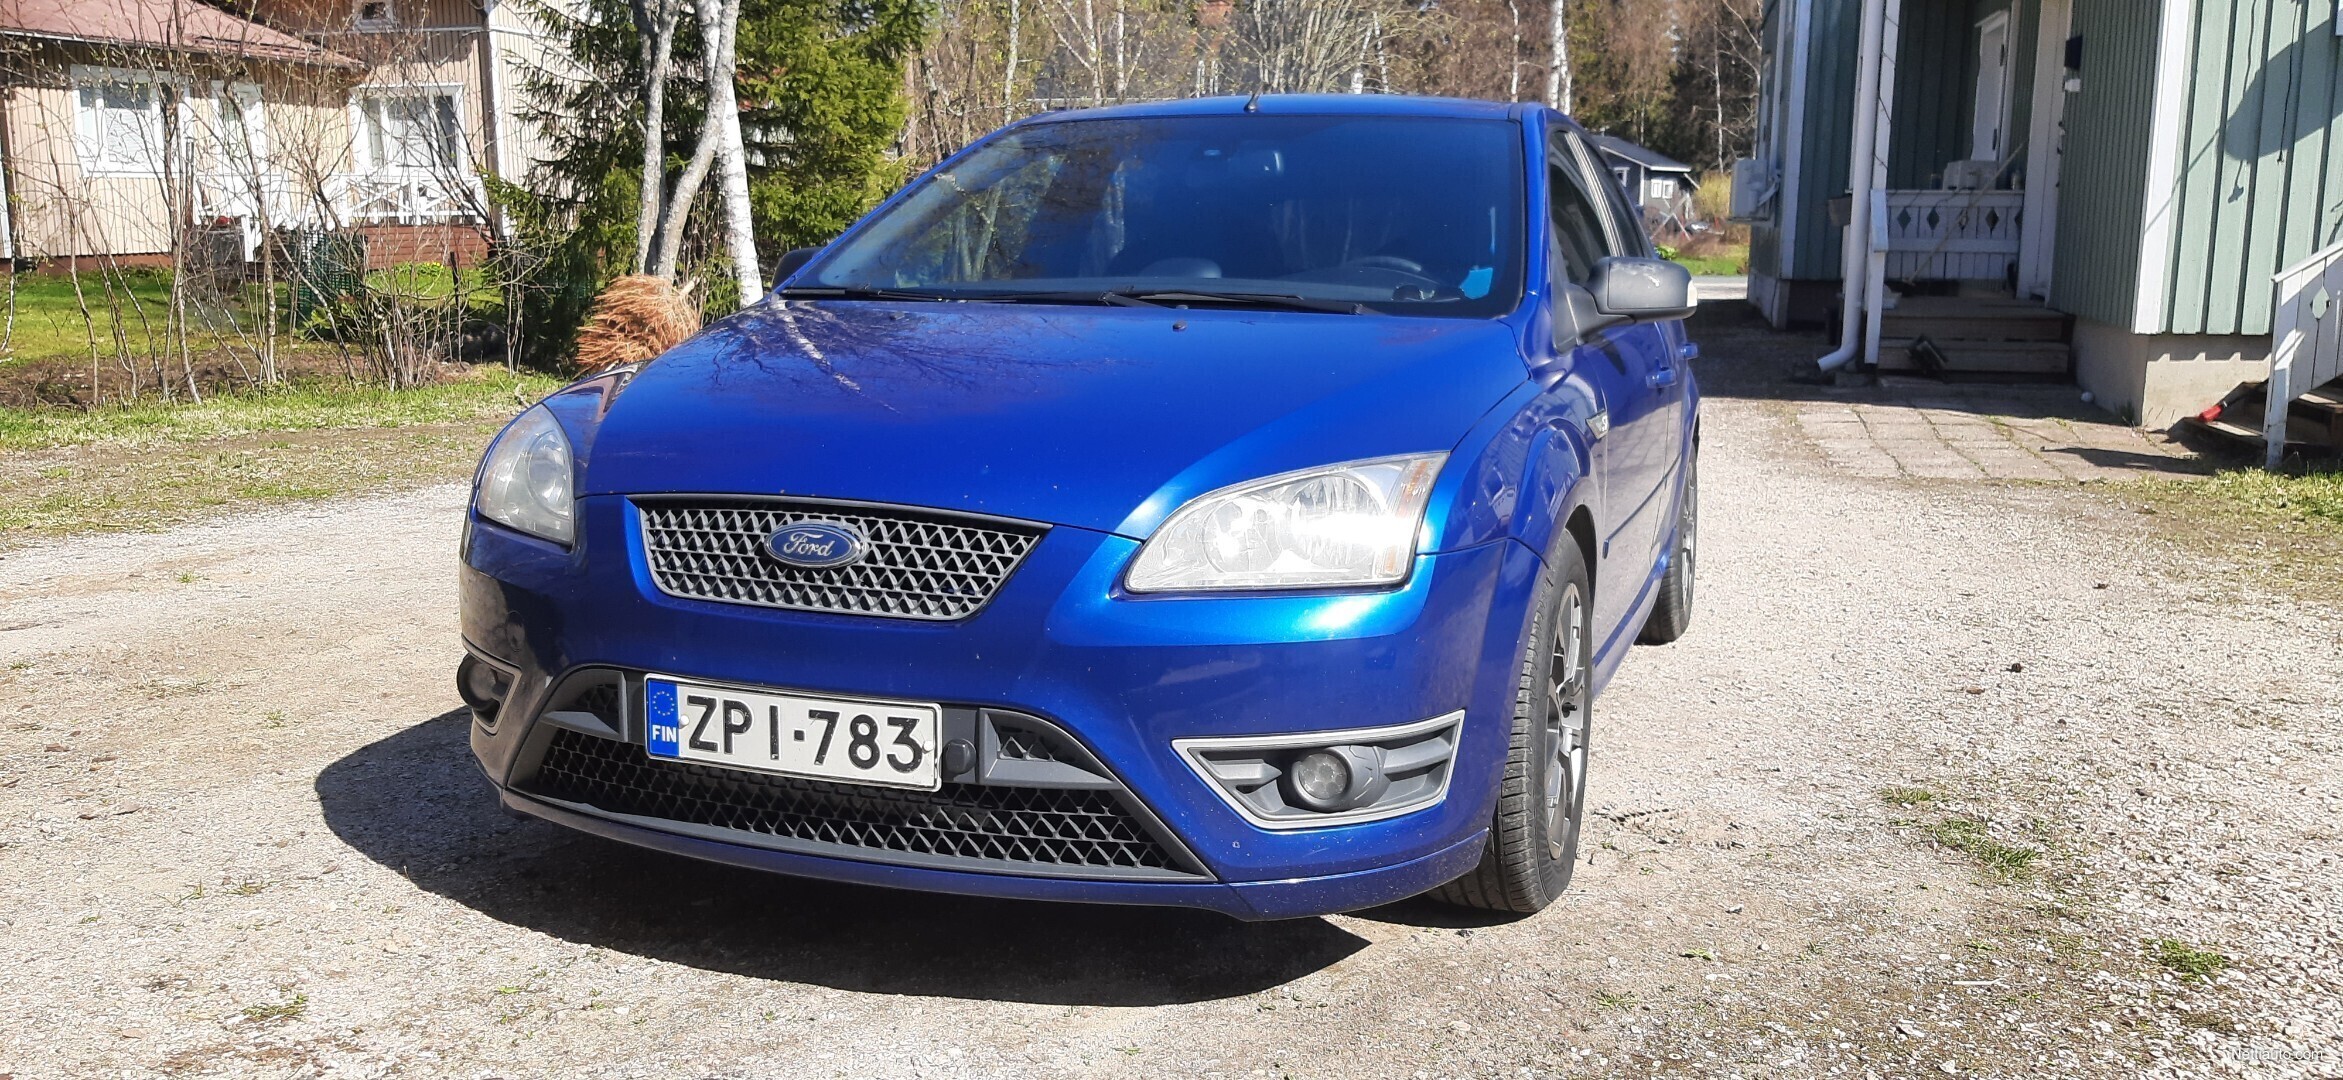 Ford Focus 2.5 ST 5d Hatchback 2005 - Used vehicle - Nettiauto